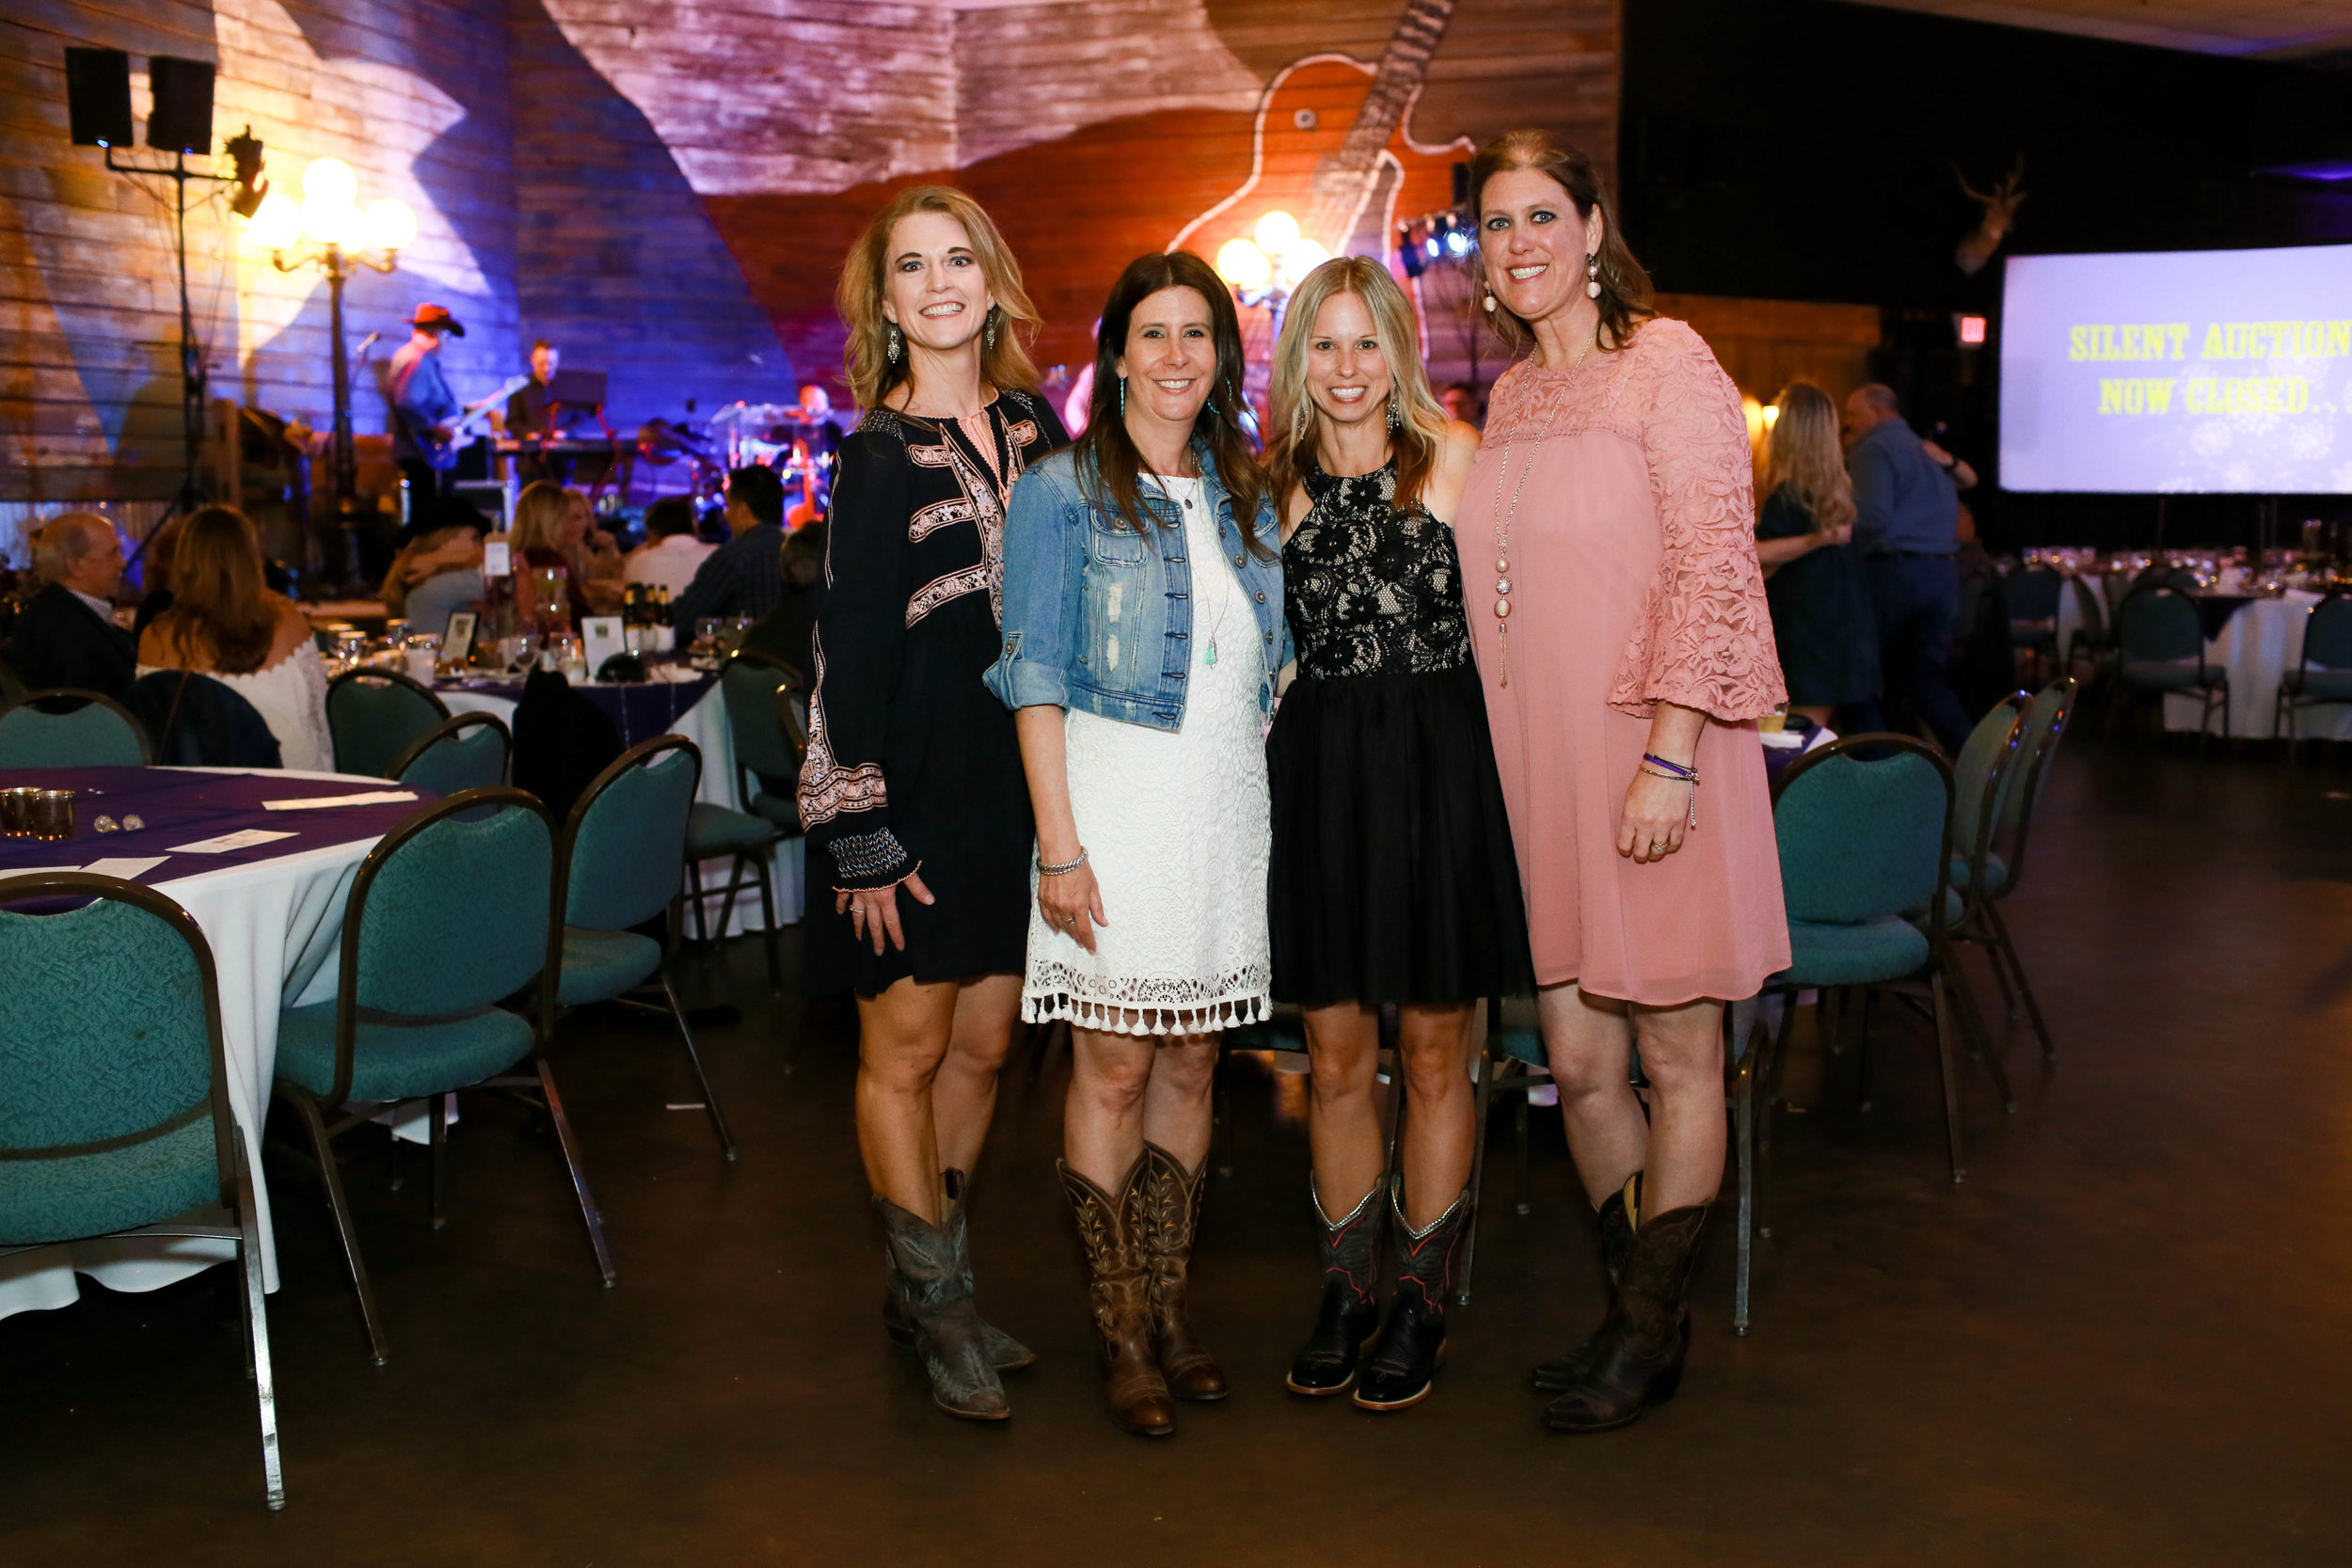 Ally’s Wish co-founders Holly, Melissa, Missy, and Heather.